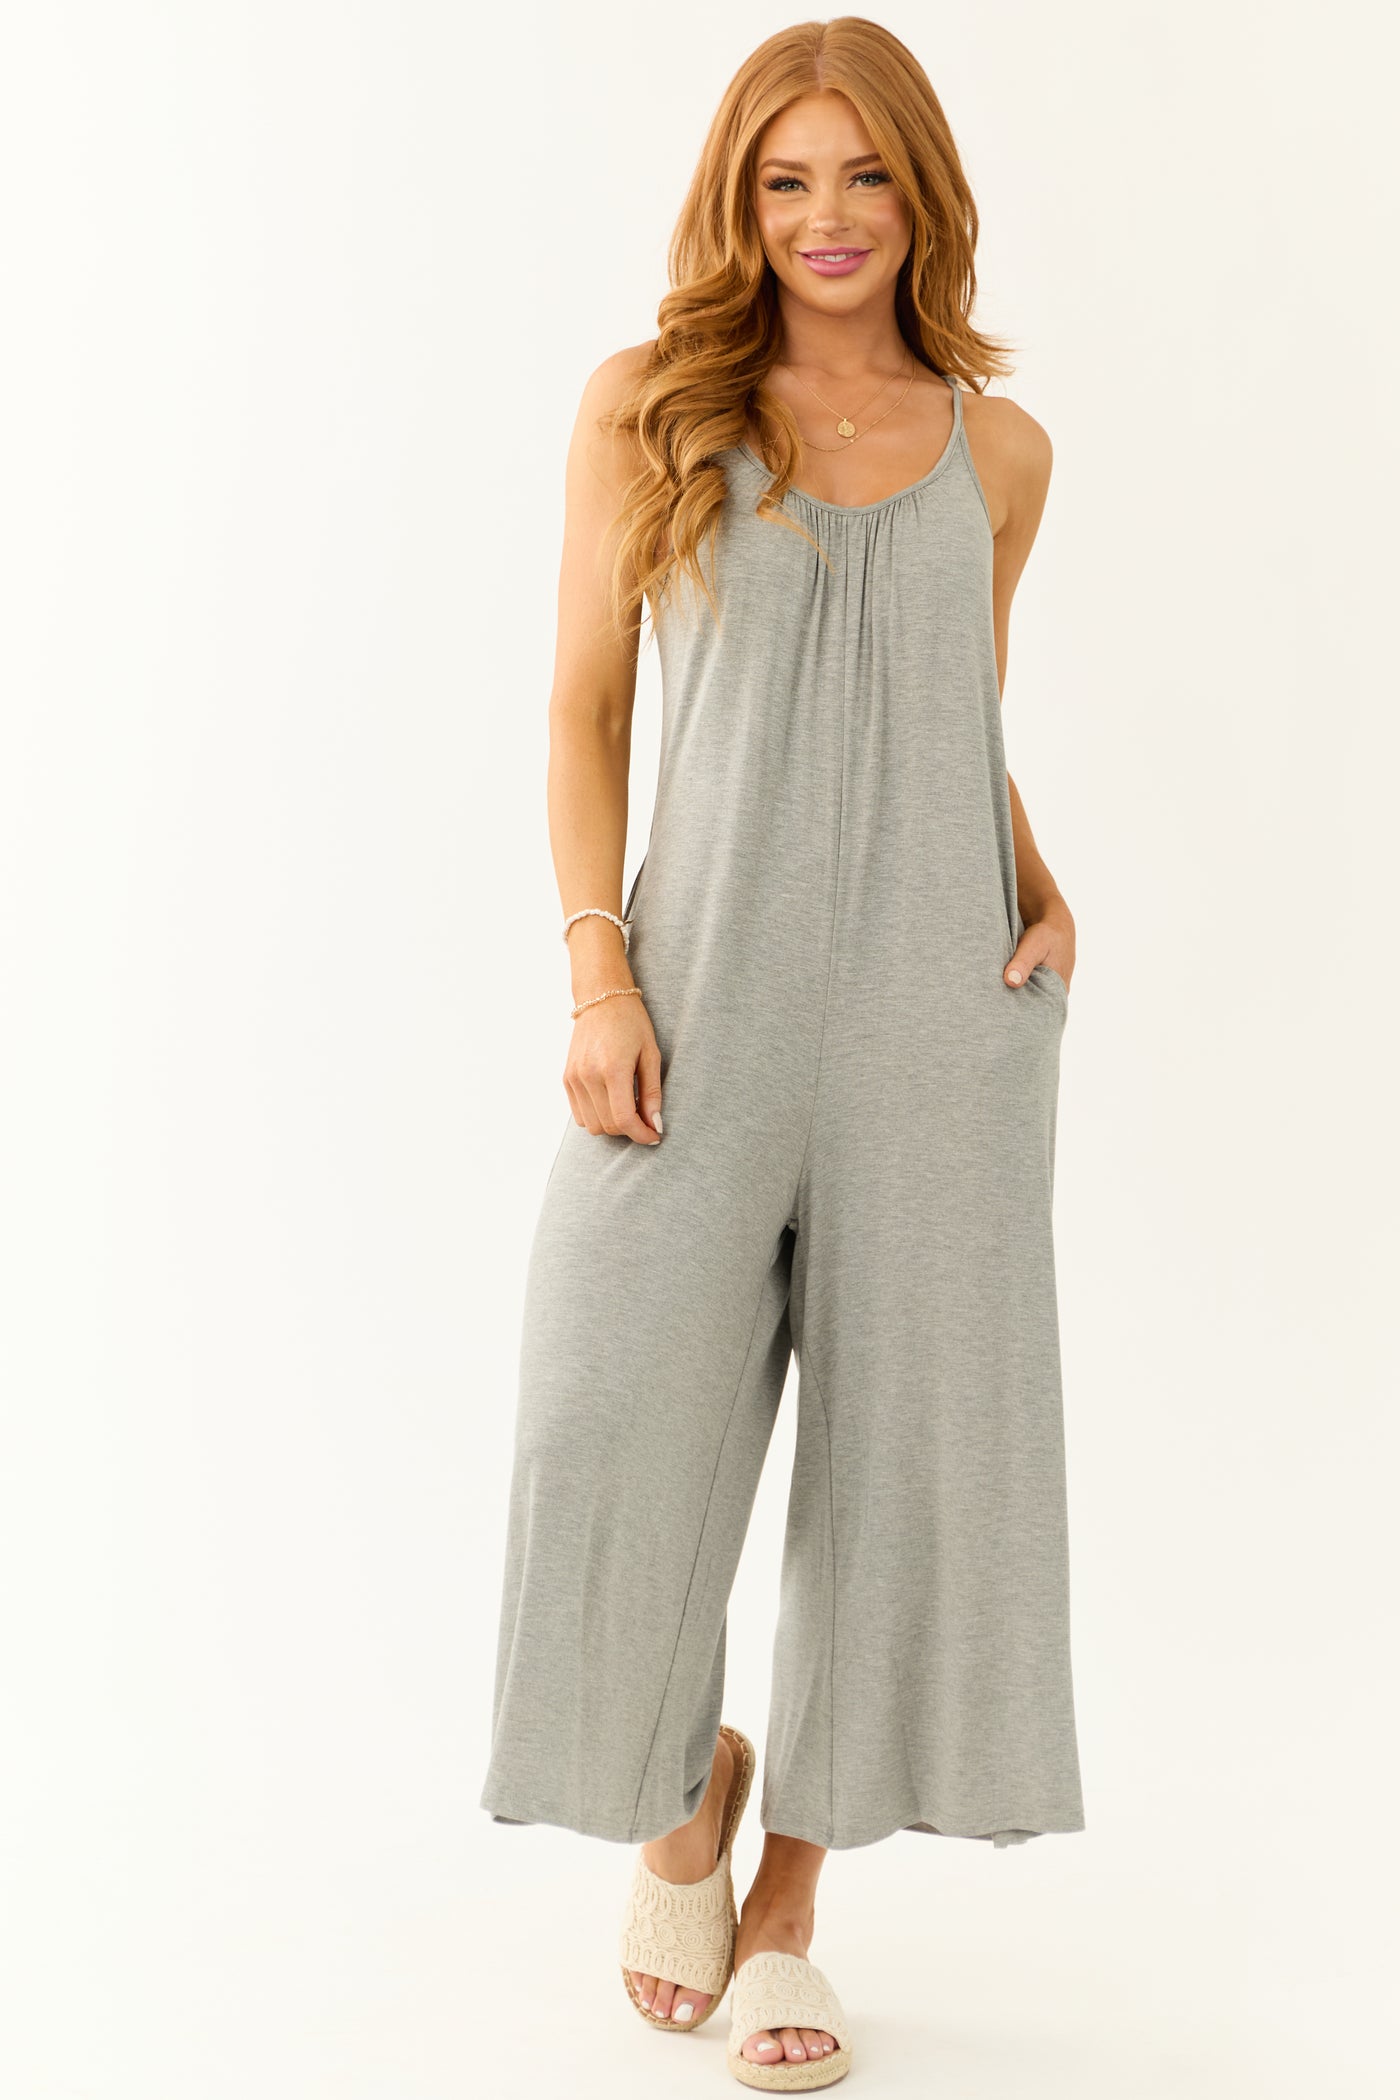 Heather Grey Sleeveless Loose Fit Soft Jumpsuit